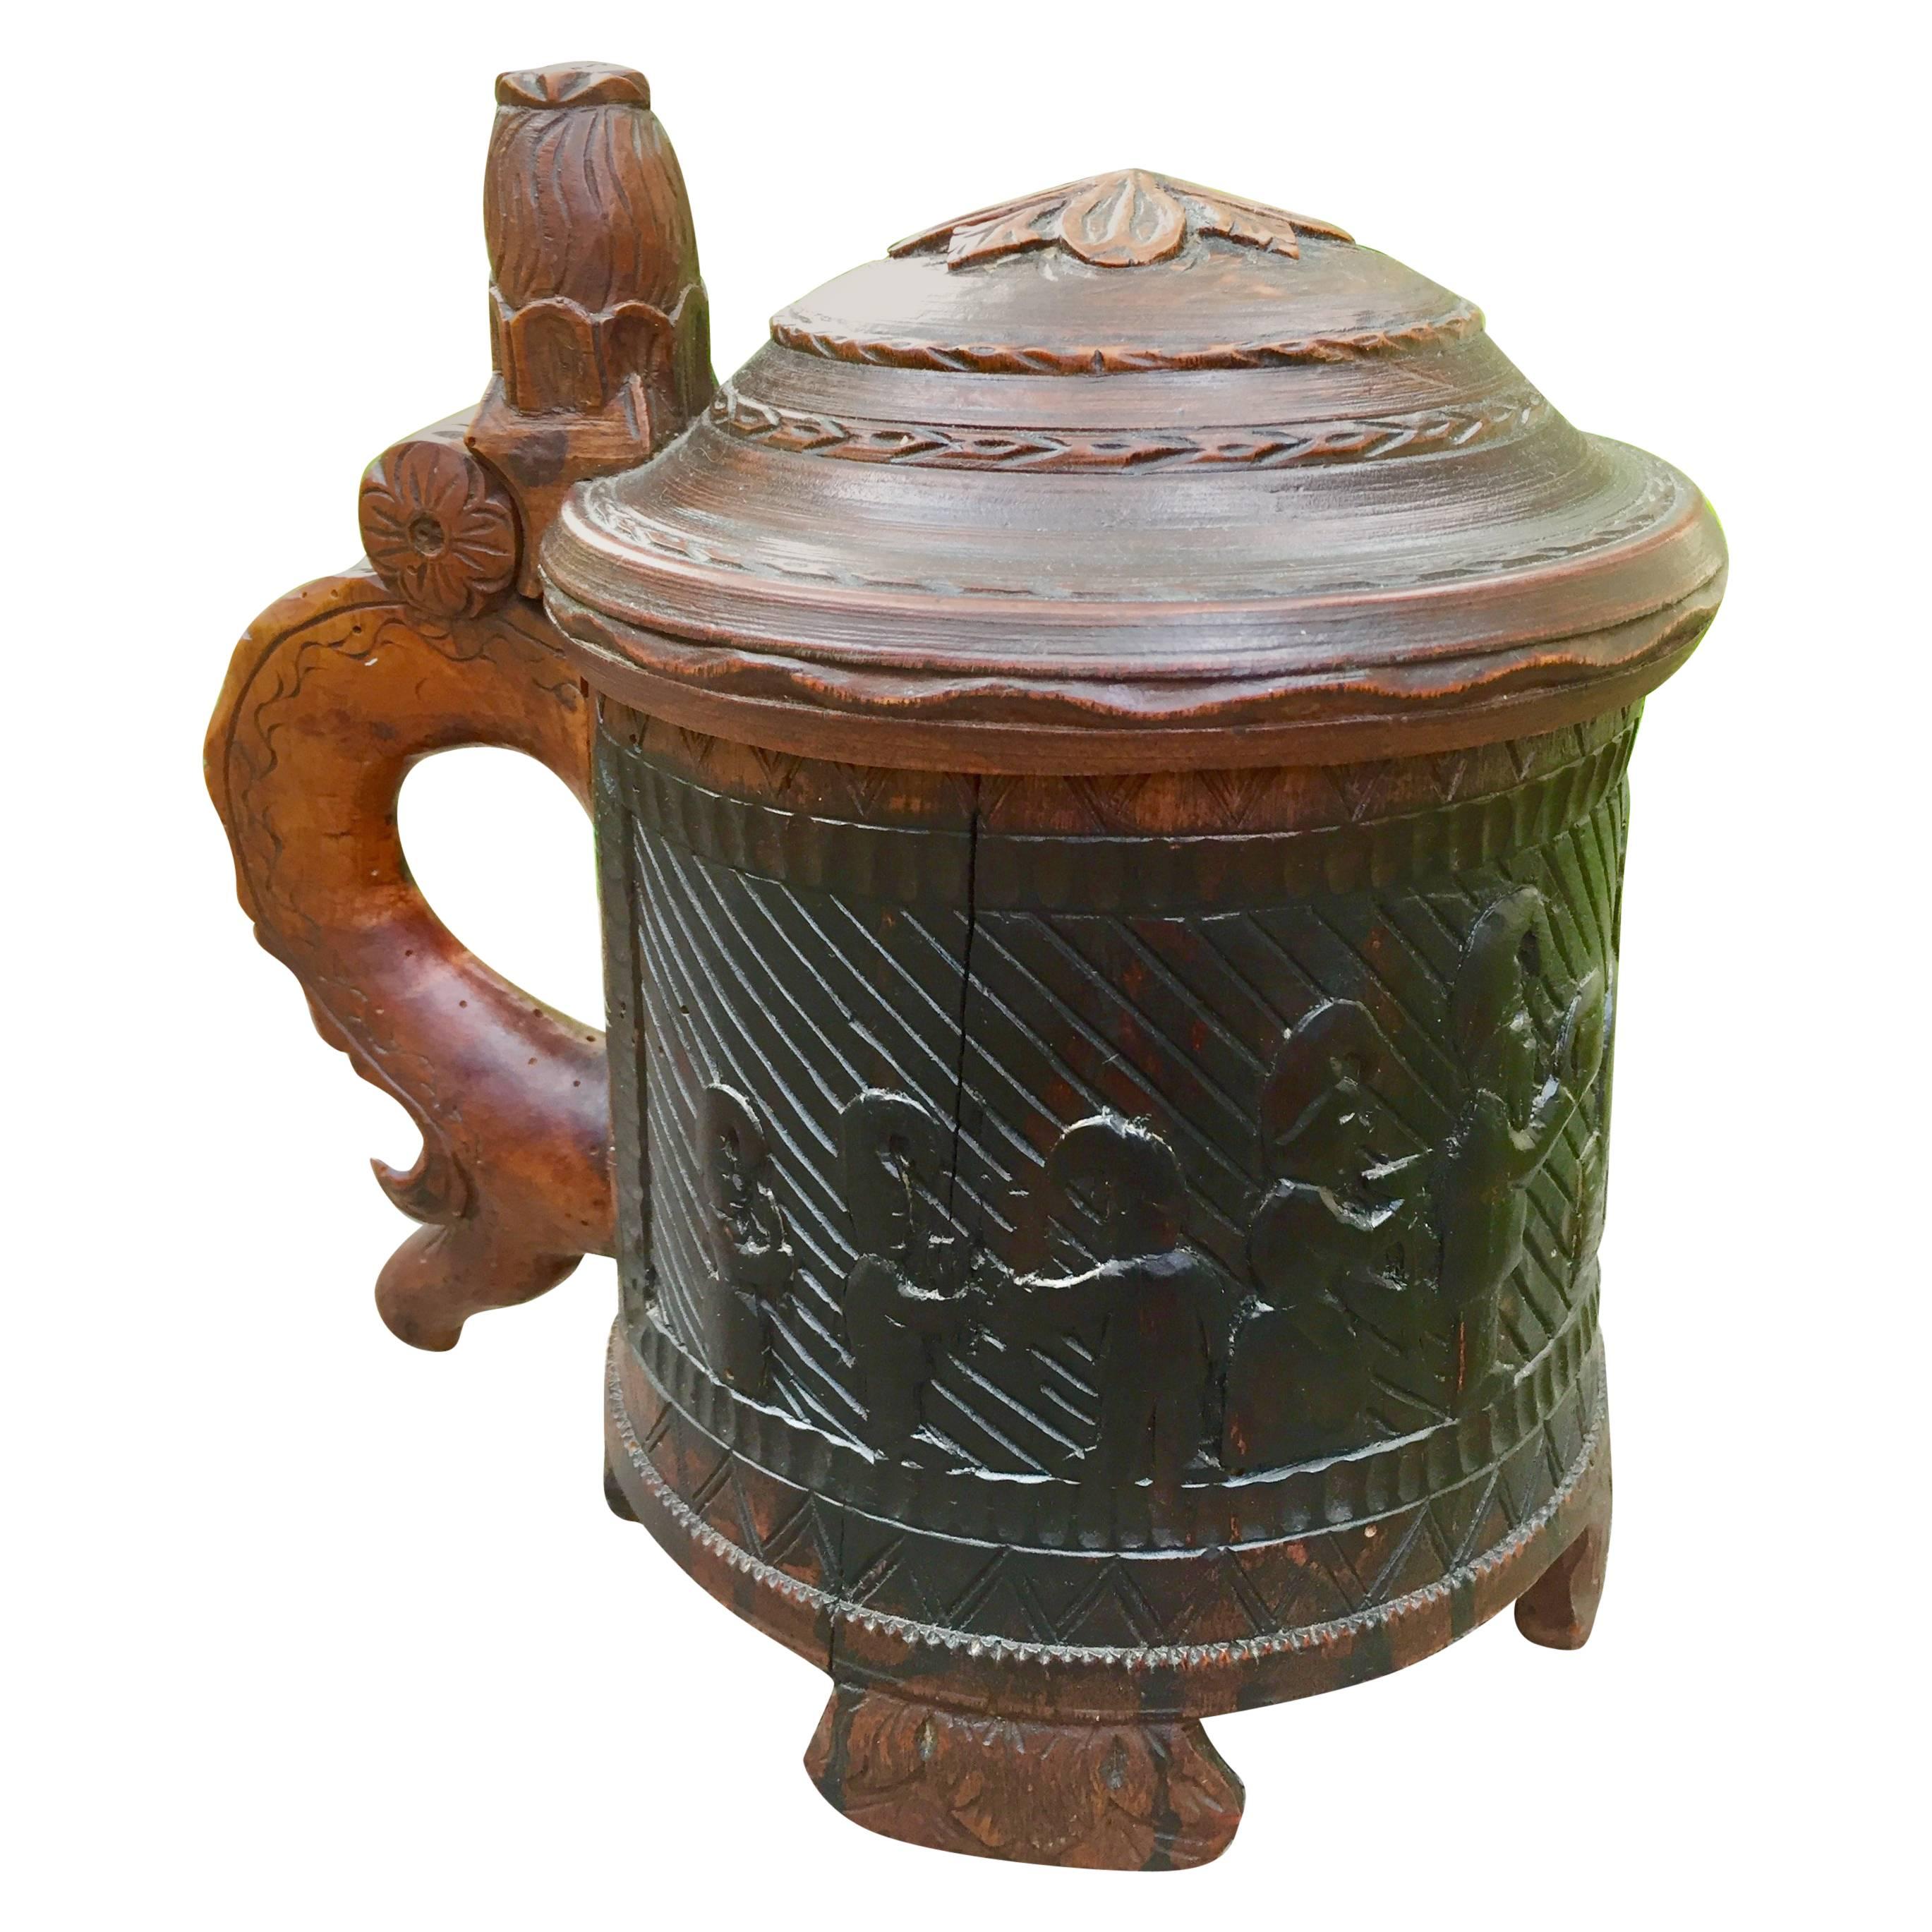 Rare Norwegian Carved Tankard Featuring Gnomes, Mid-18th Century For Sale